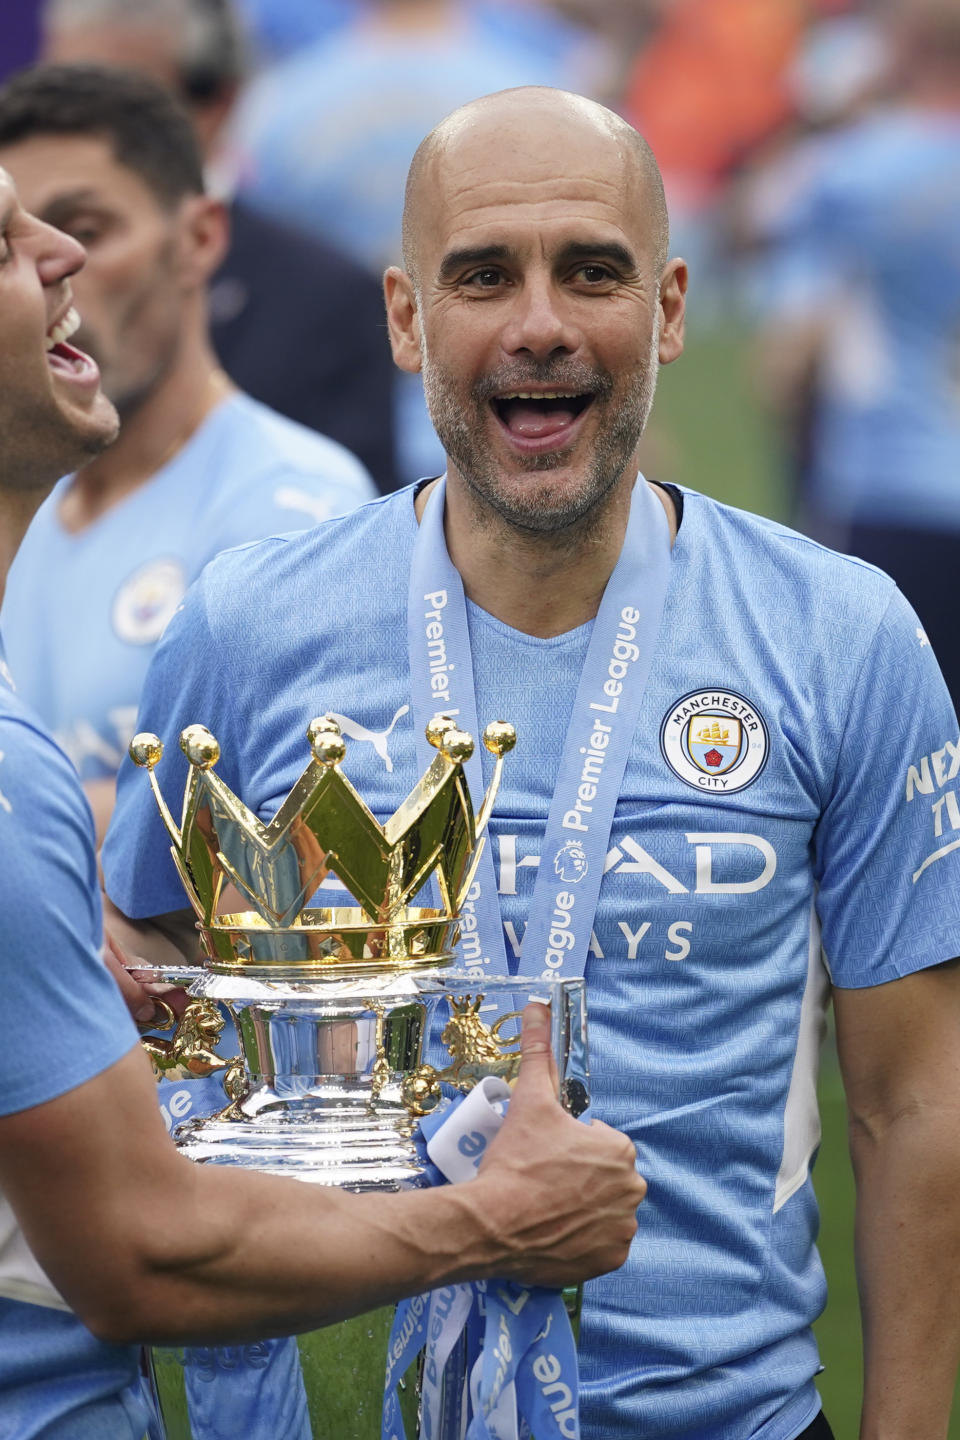 Manchester City's head coach Pep Guardiola, right, smiles with trophy after winning the 2022 English Premier League title at the Etihad Stadium in Manchester, England, Sunday, May 22, 2022. (AP Photo/Dave Thompson)